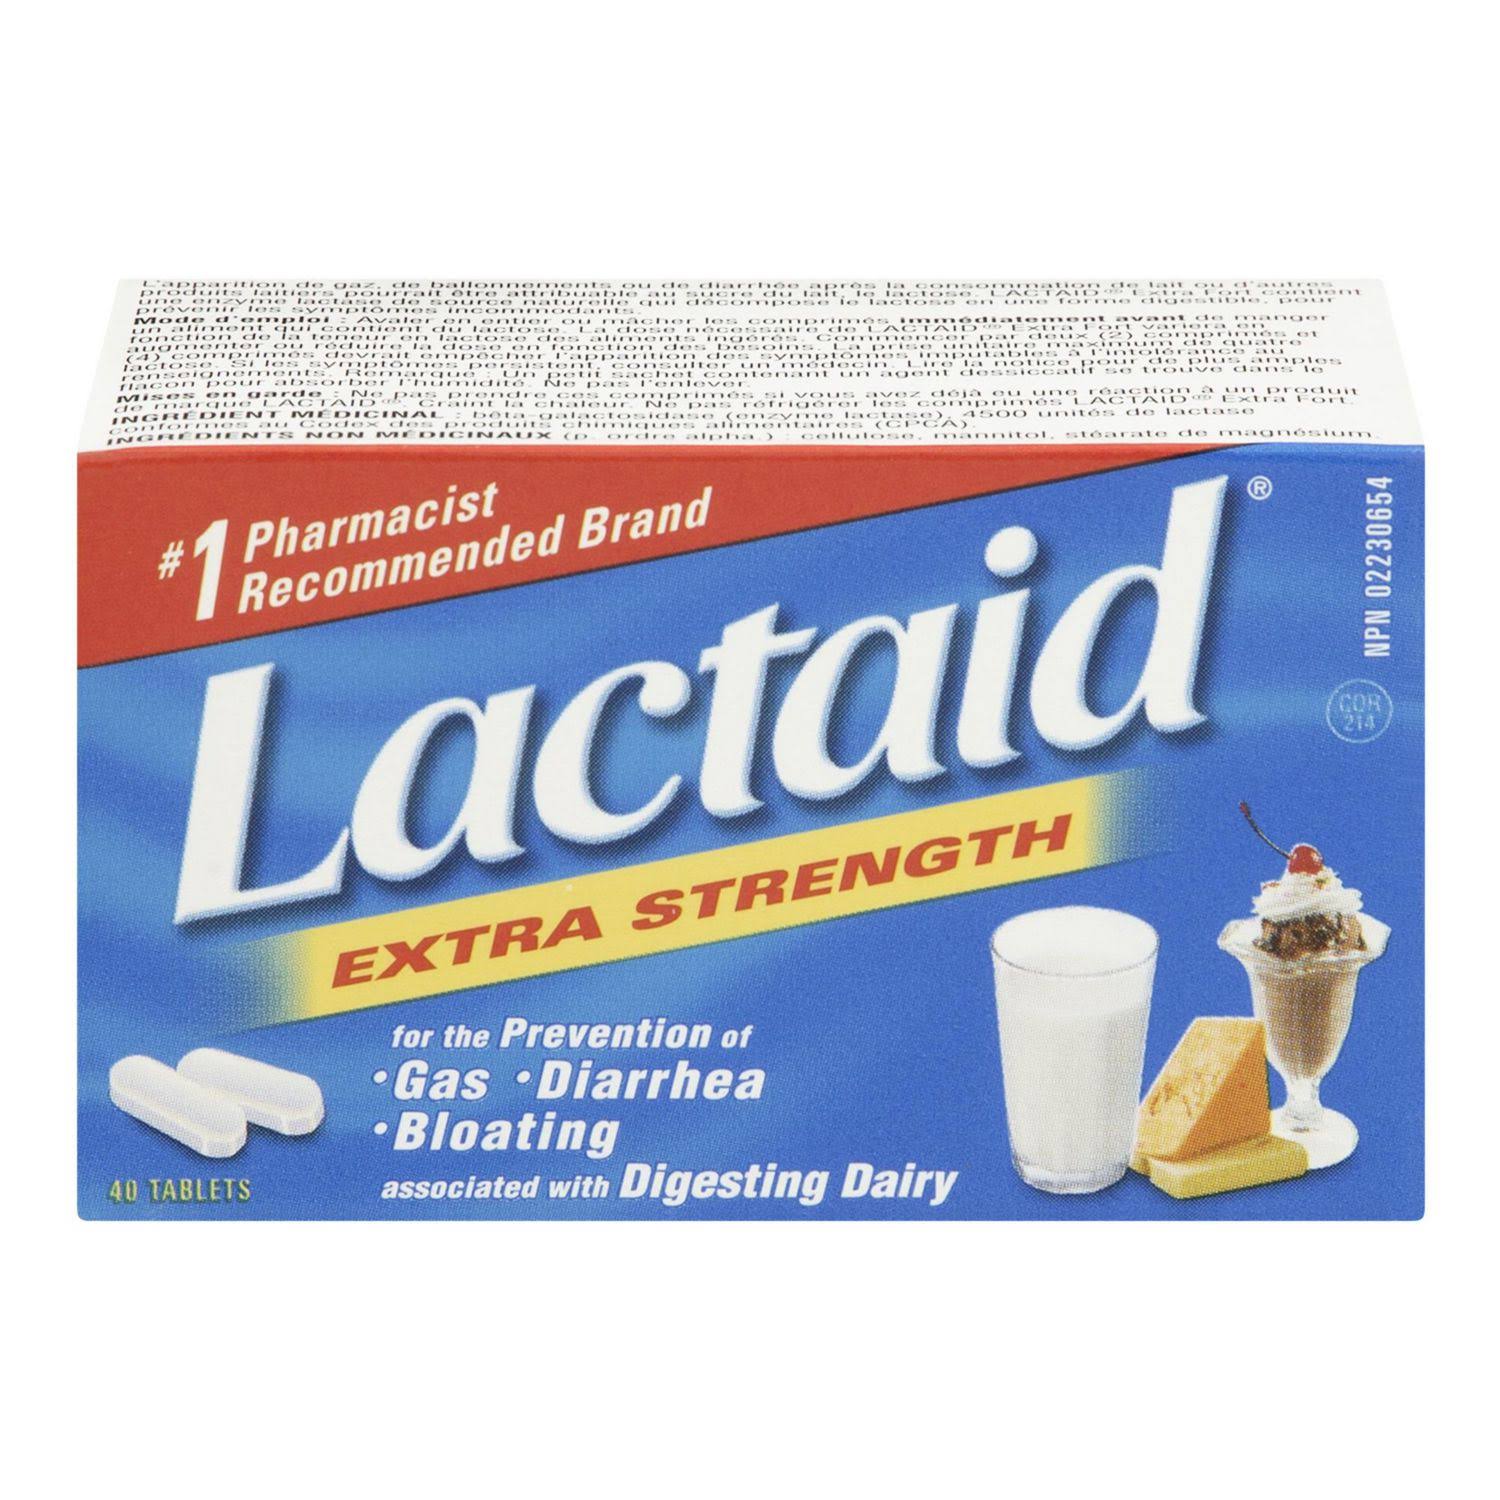 Lactaid Extra Strength - 40 Tablets